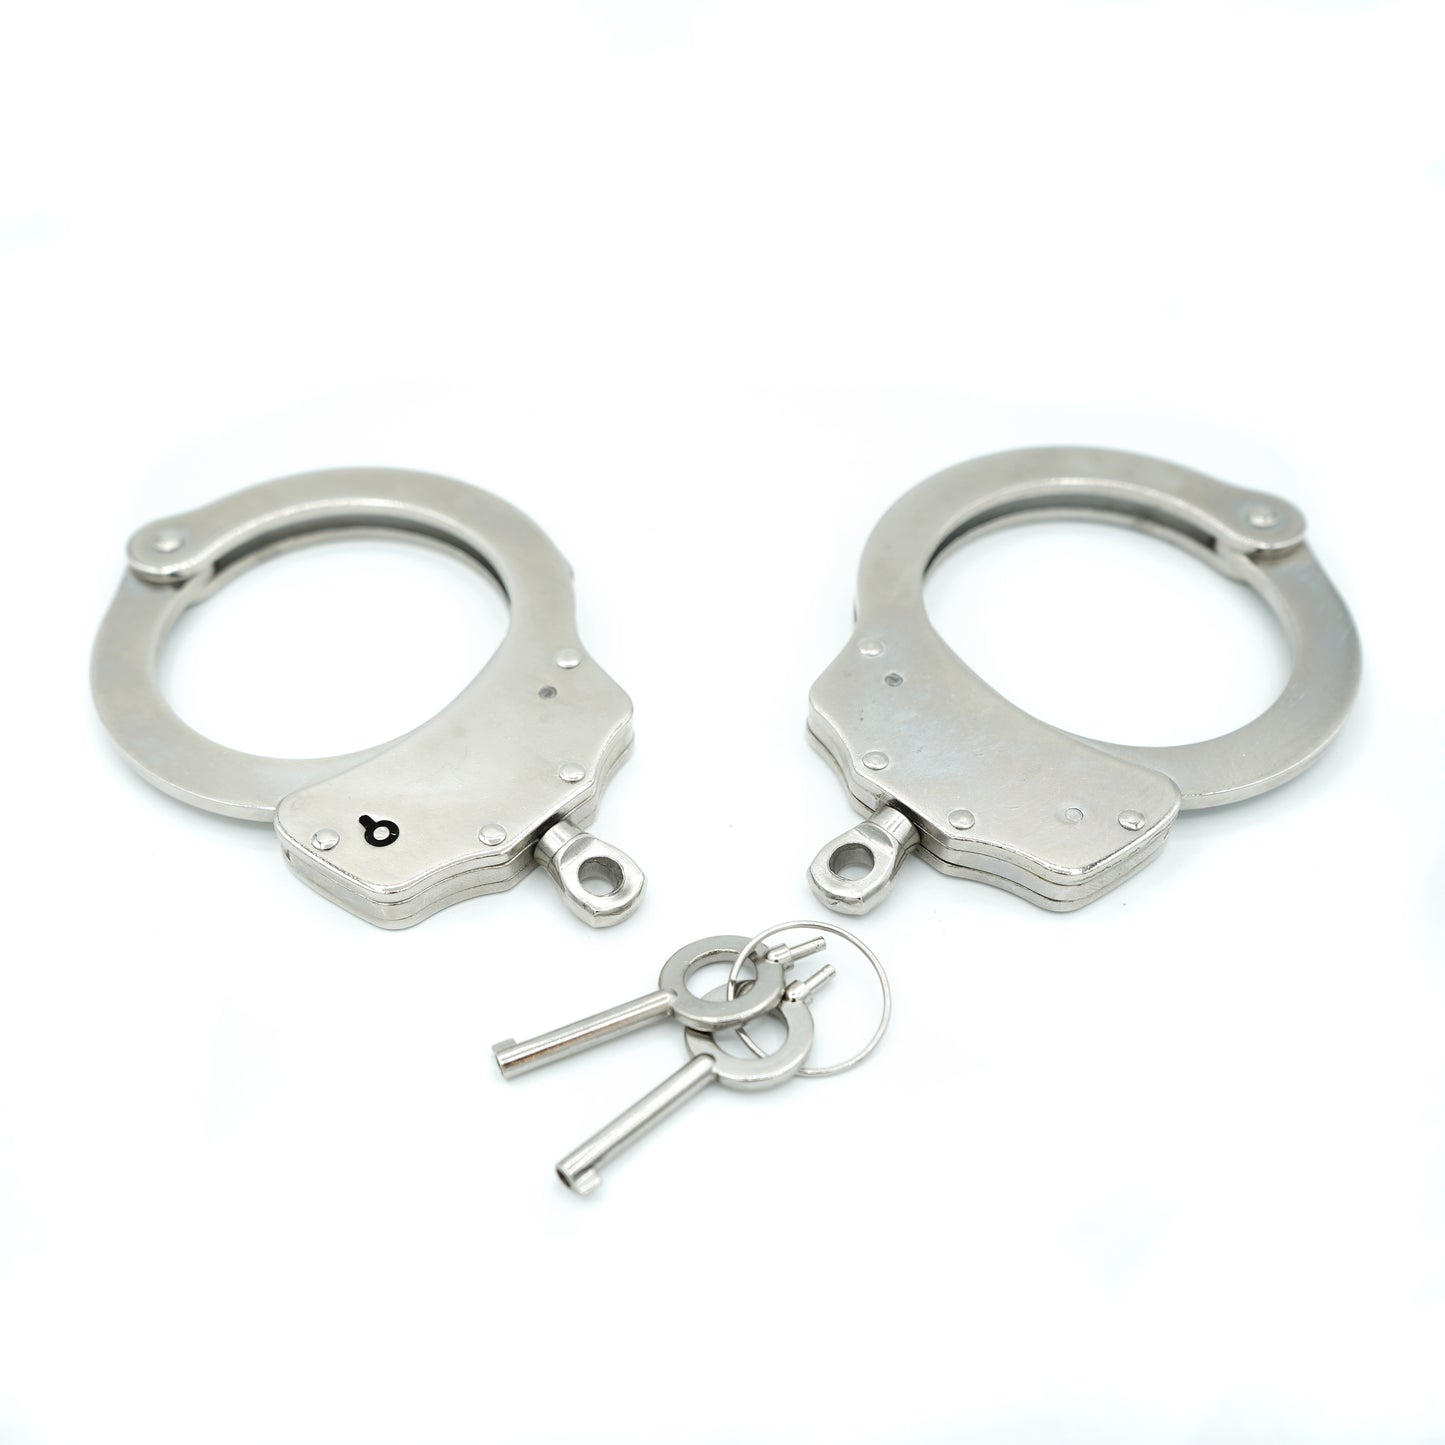 Steel Police Handcuffs Without Chain